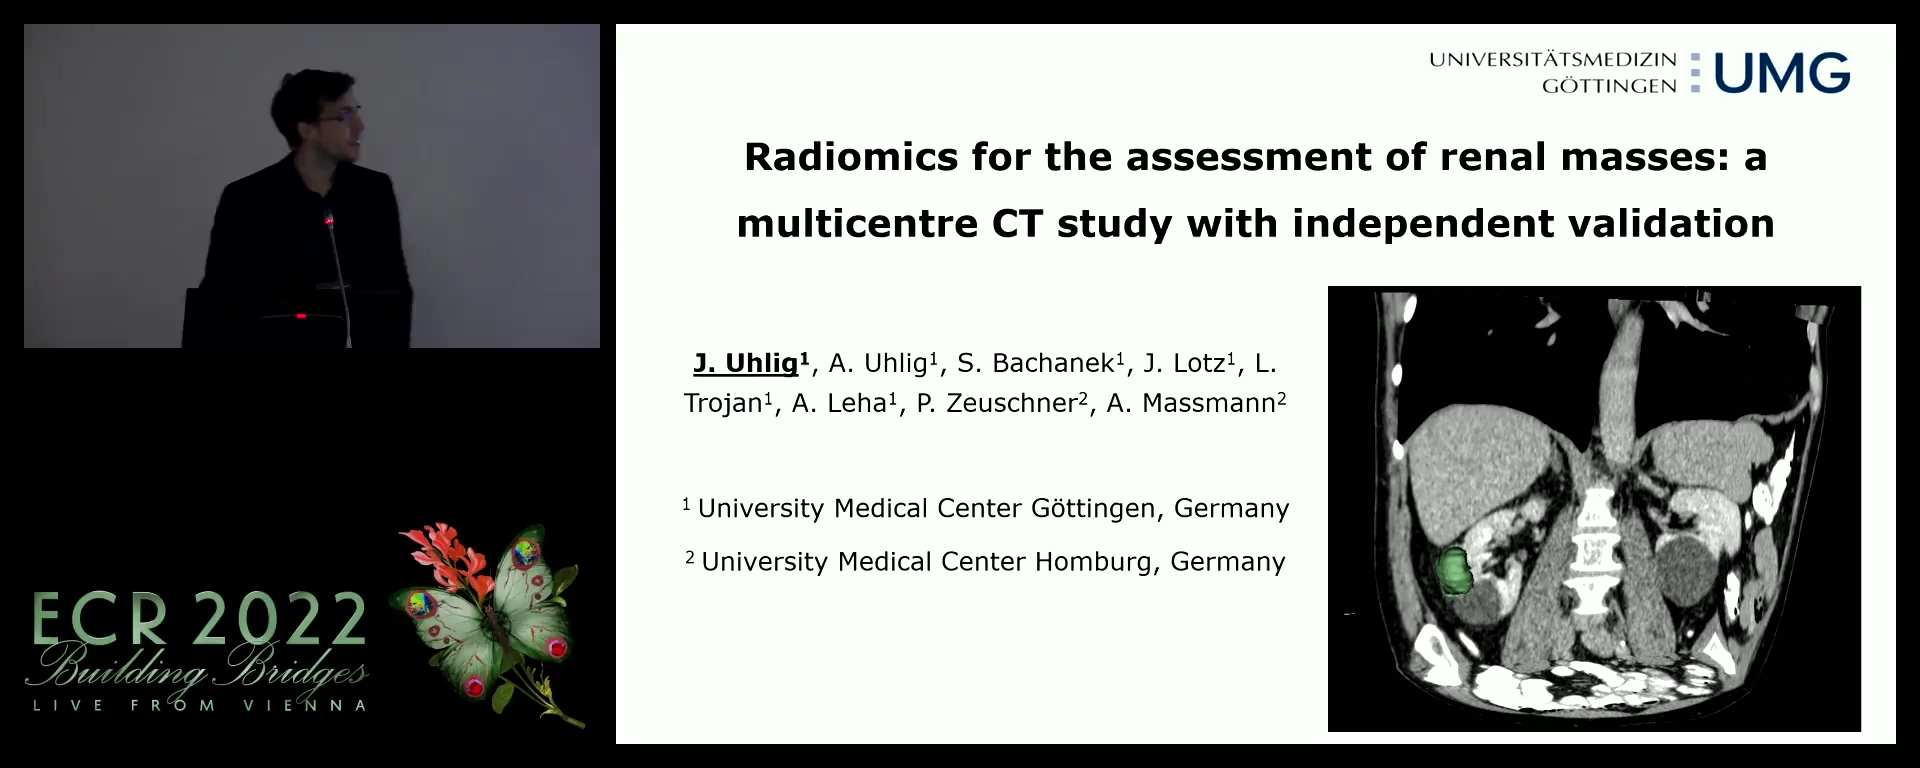 Radiomics for the assessment of renal masses: a multicentre CT study with independent validation